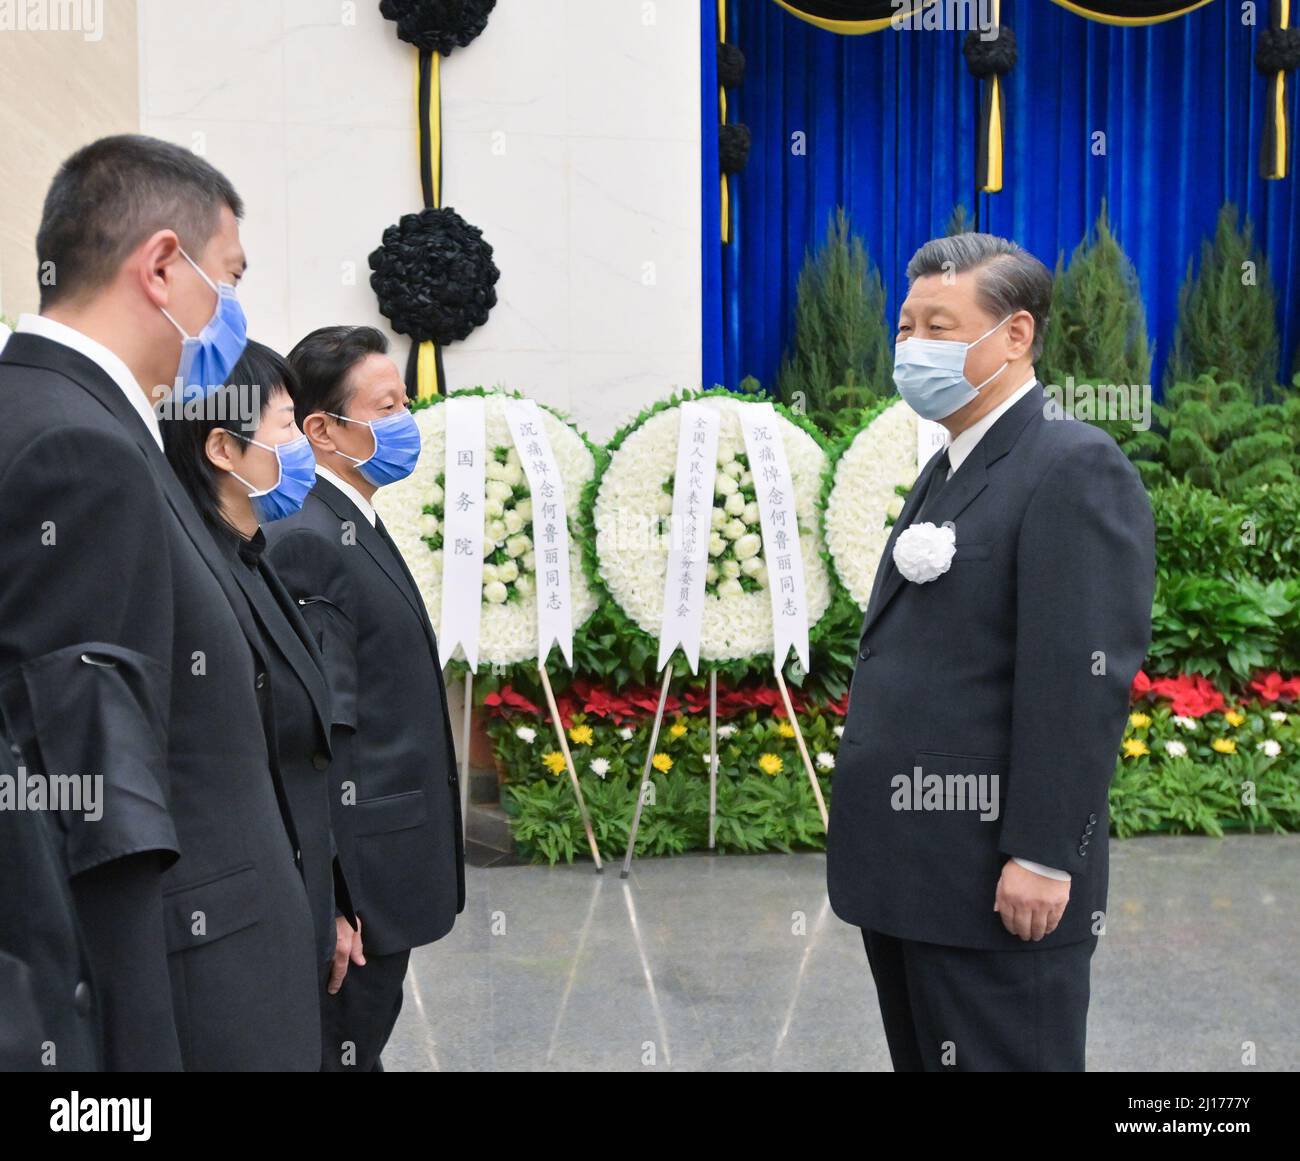 Beijing, China. 23rd Mar, 2022. Xi Jinping offers his condolences to He Luli's family, in Beijing, capital of China, March 23, 2022. He Luli, former leader of the Revolutionary Committee of the Chinese Kuomintang, was cremated in Beijing on Wednesday. Xi Jinping, Li Zhanshu, and Wang Yang attended the funeral at the Babaoshan Revolutionary Cemetery on Wednesday morning. Credit: Li Tao/Xinhua/Alamy Live News Stock Photo